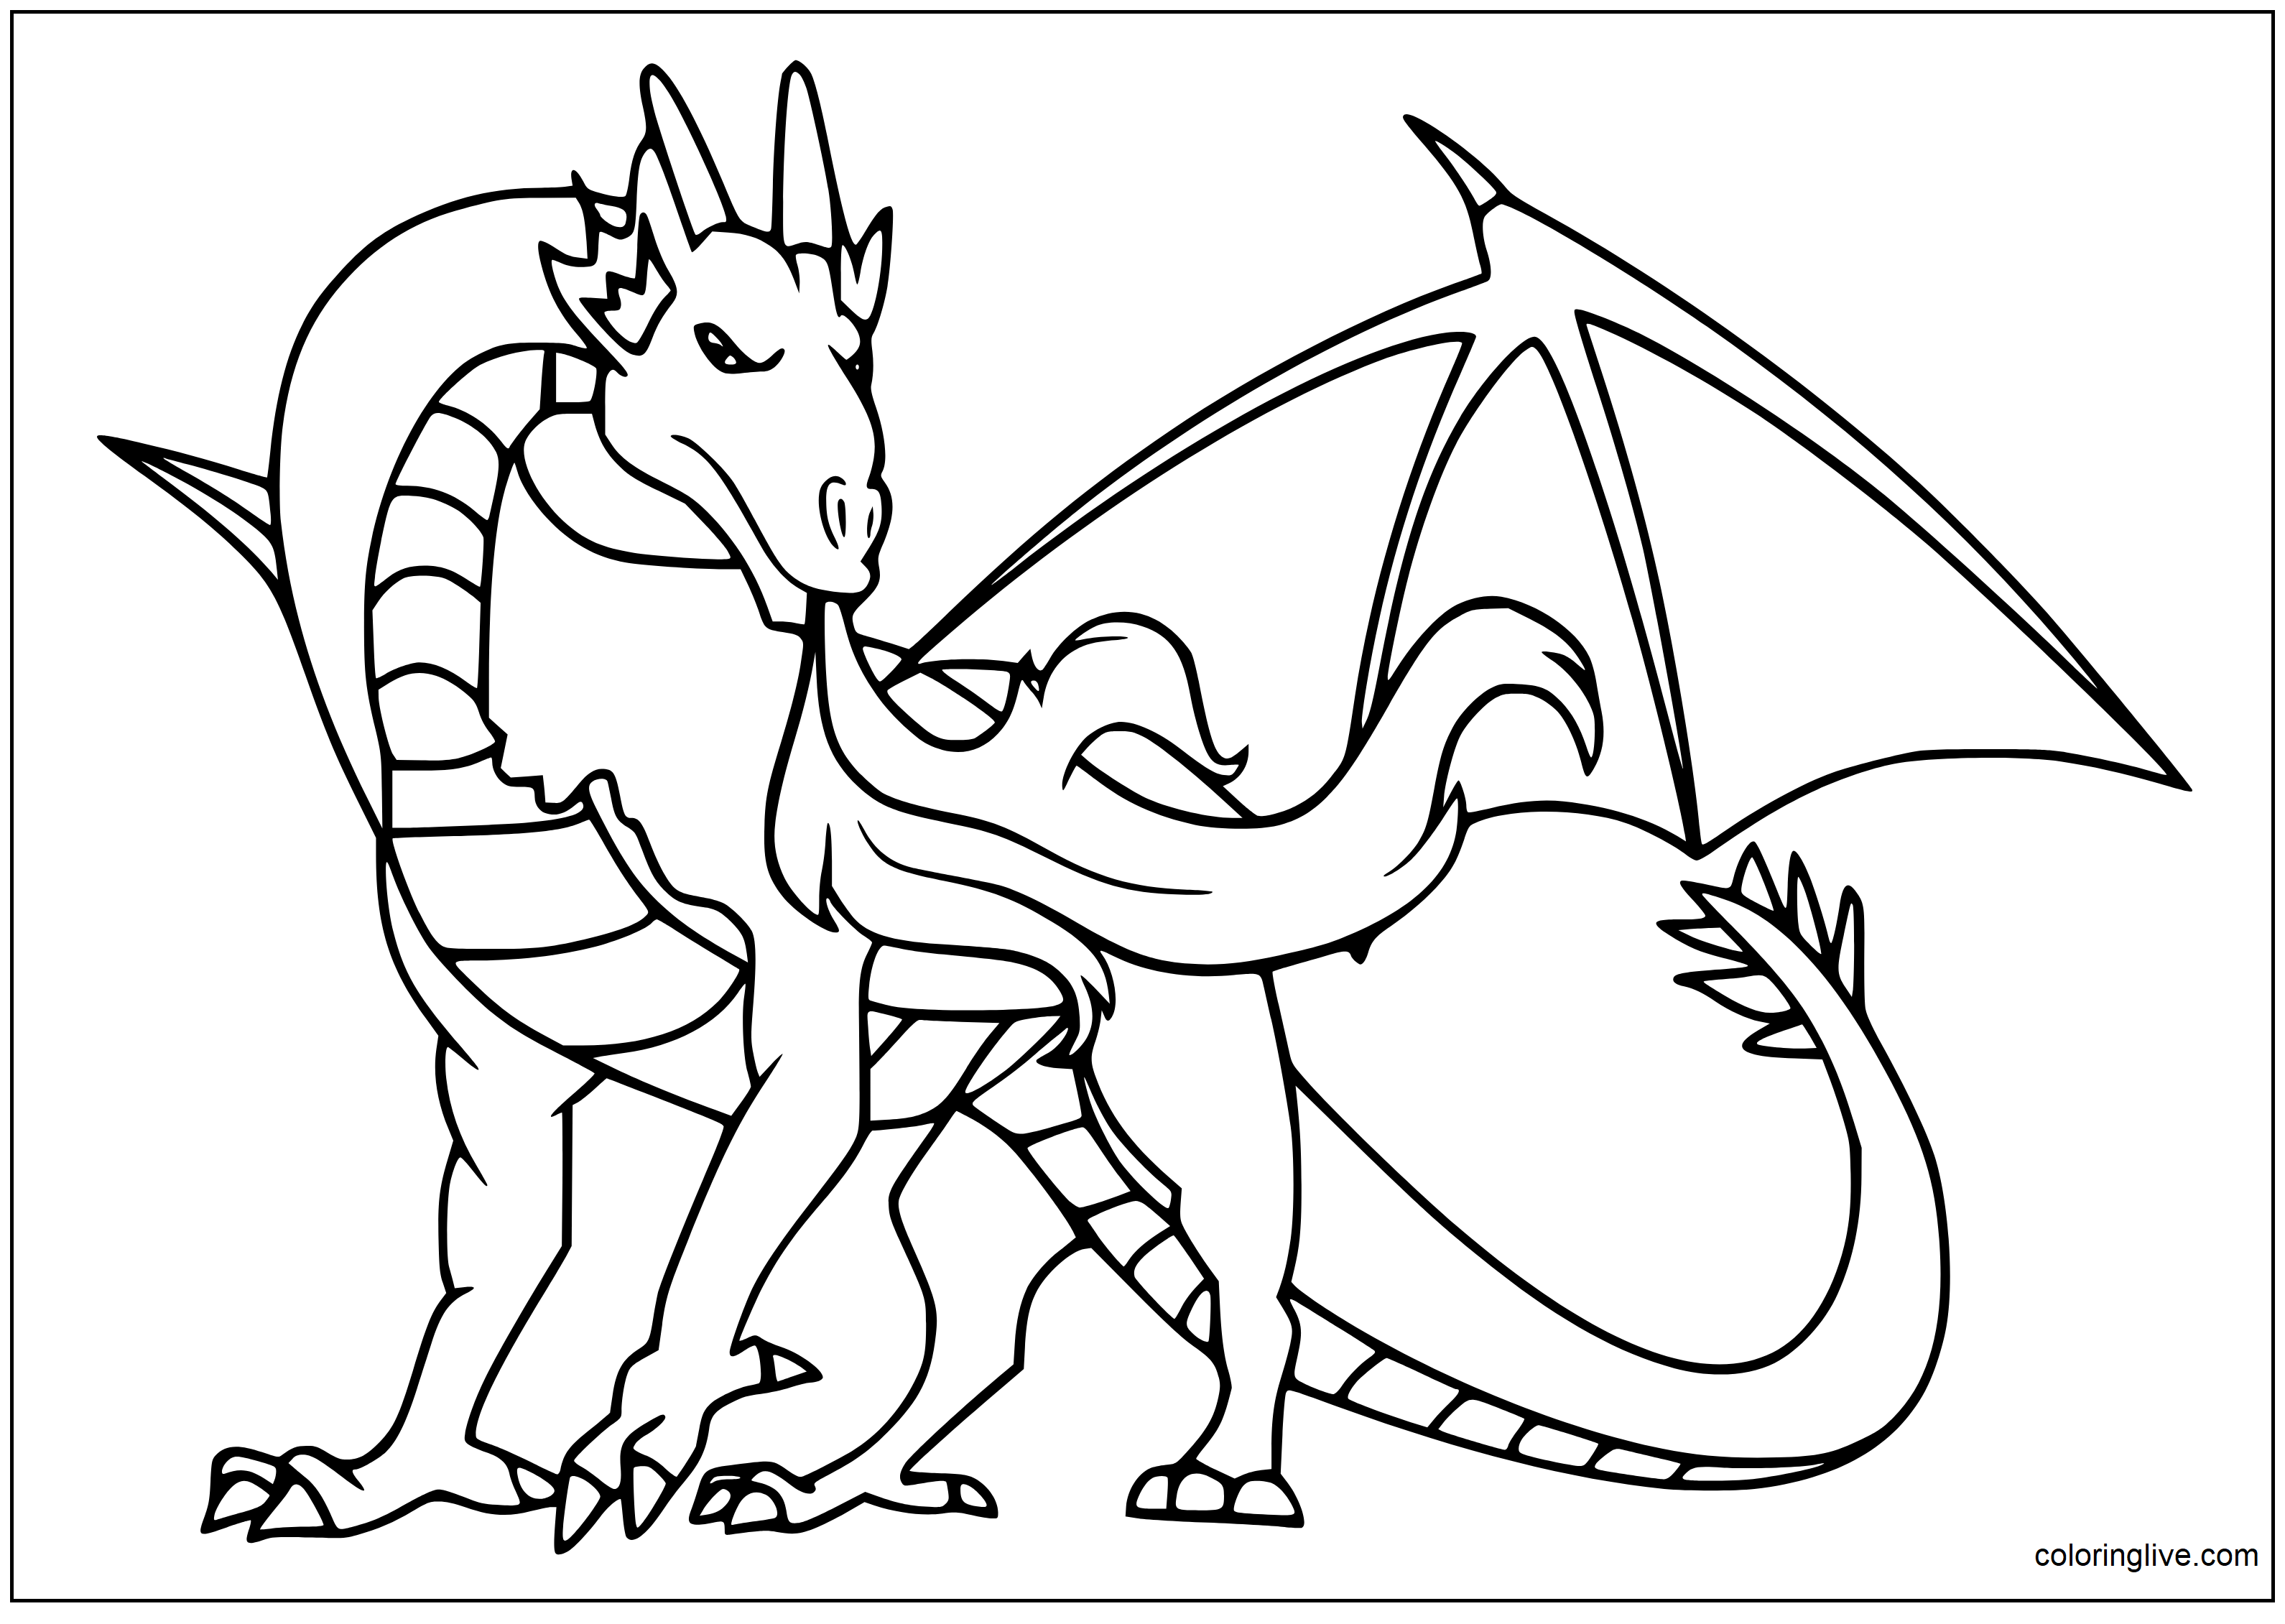 Printable a Noble Dragon Coloring Page for kids.